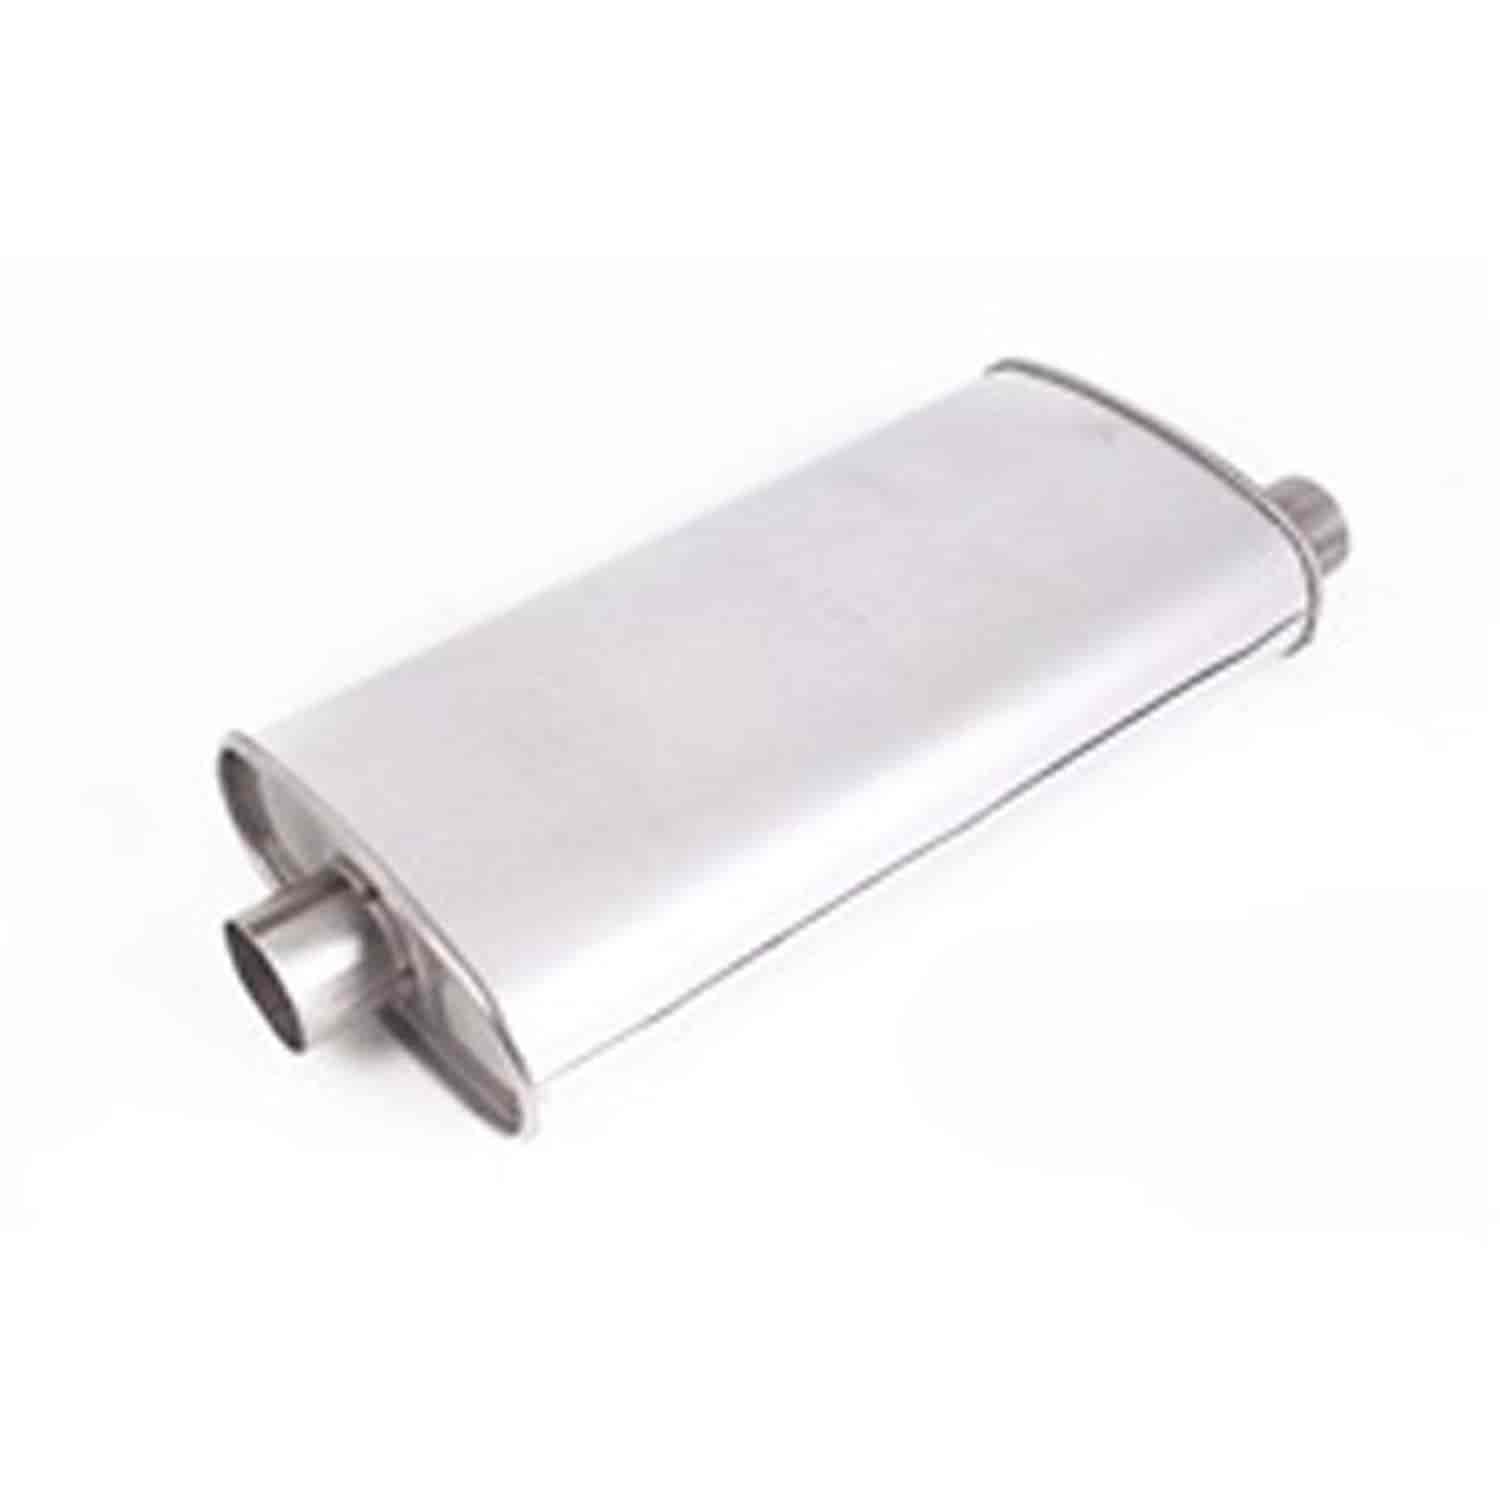 Replacement muffler from Omix-ADA, Fits 02-04 Jeep Grand Cherokees with a 4.0L or 4.7L engine.